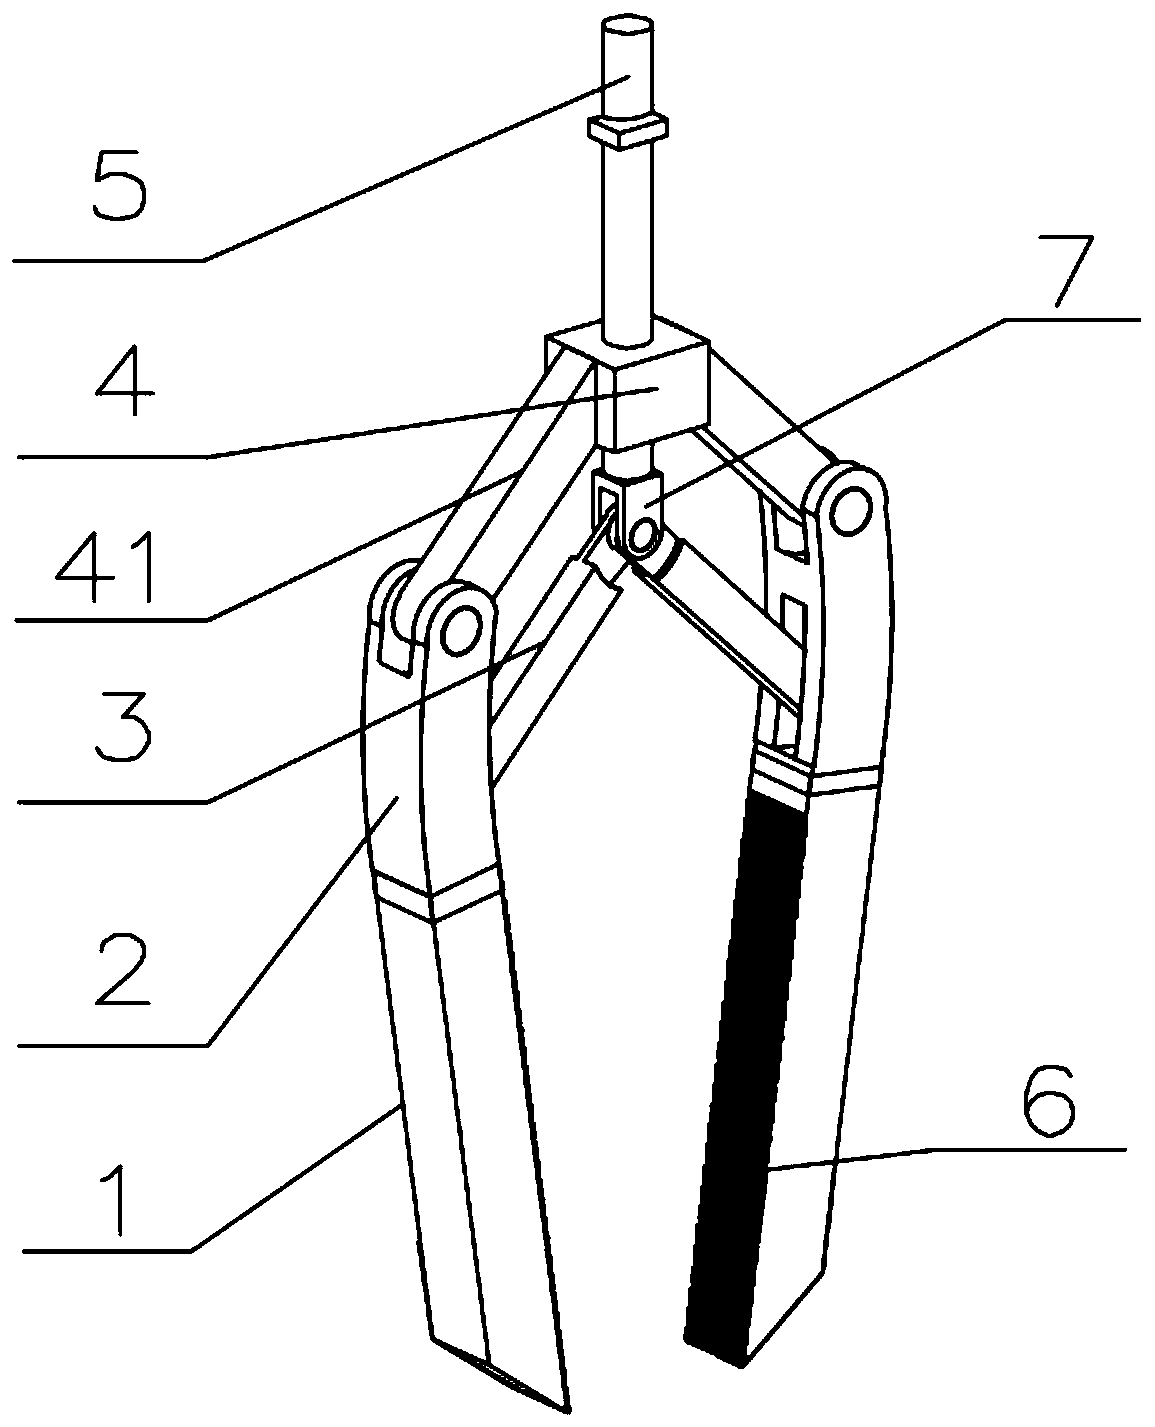 Clamping jaw with composite structure on surface